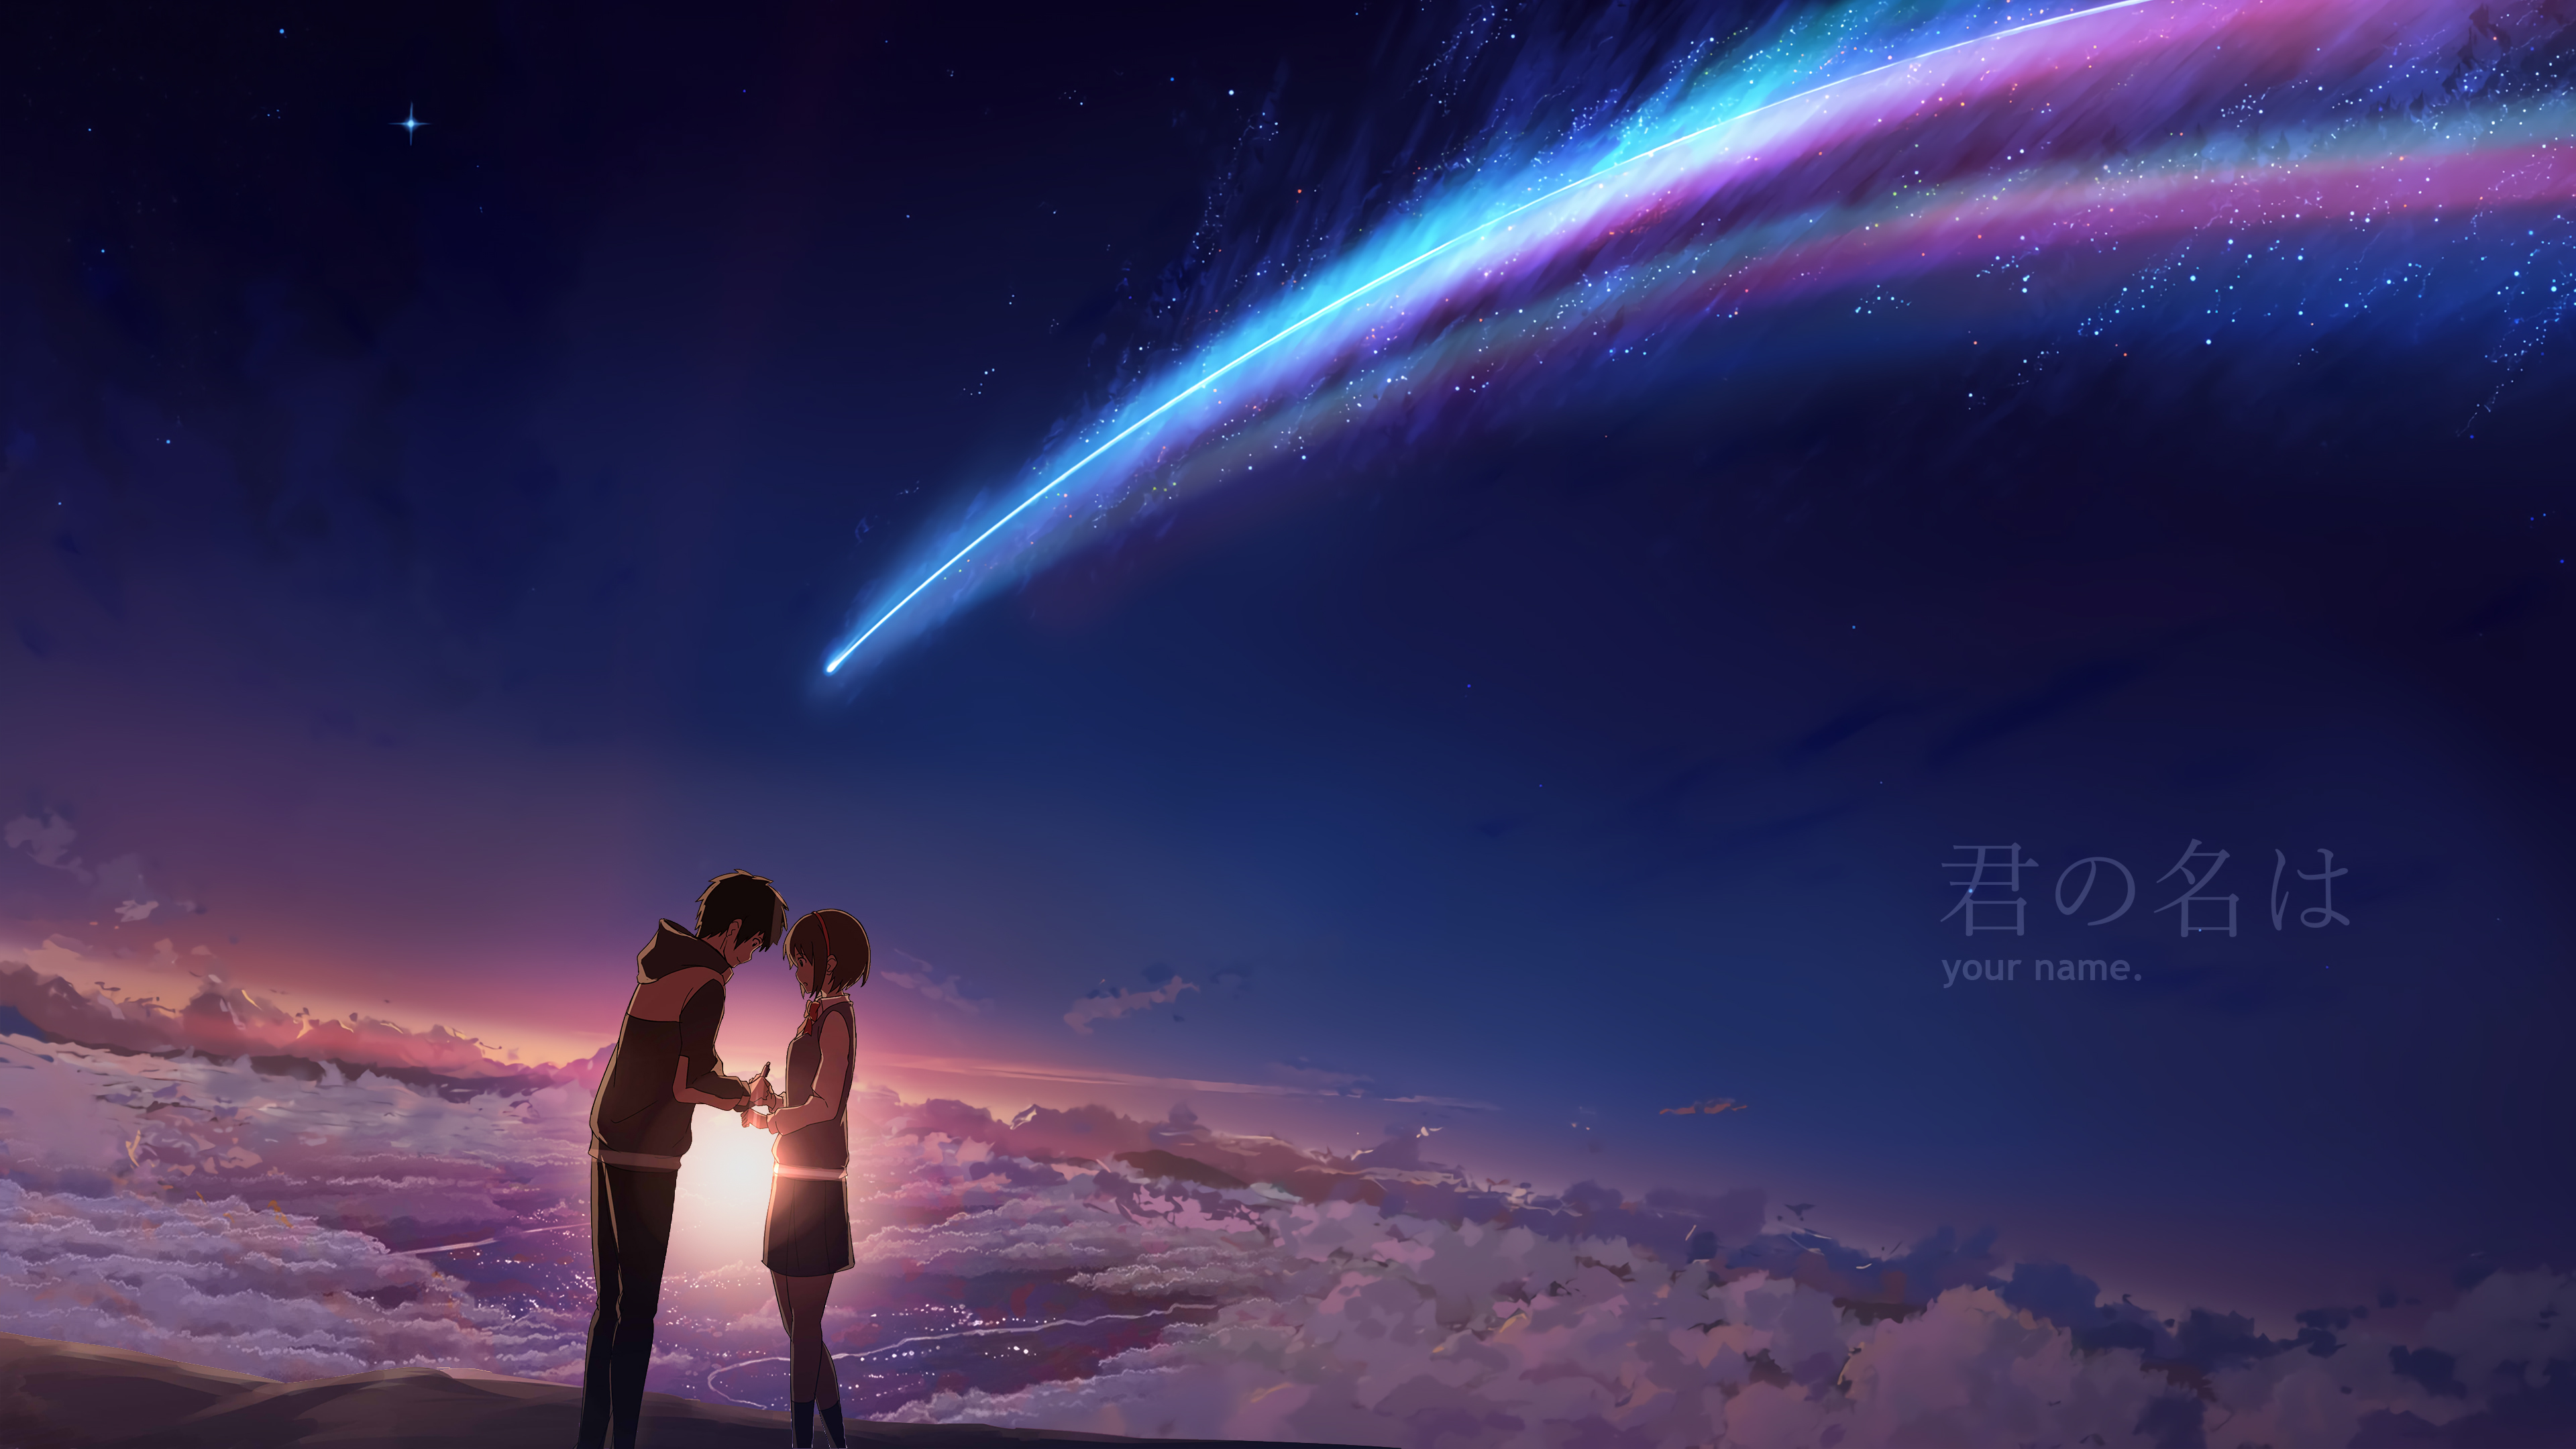 Your Name Movie (Hindi Dubbed) Download in Full HD